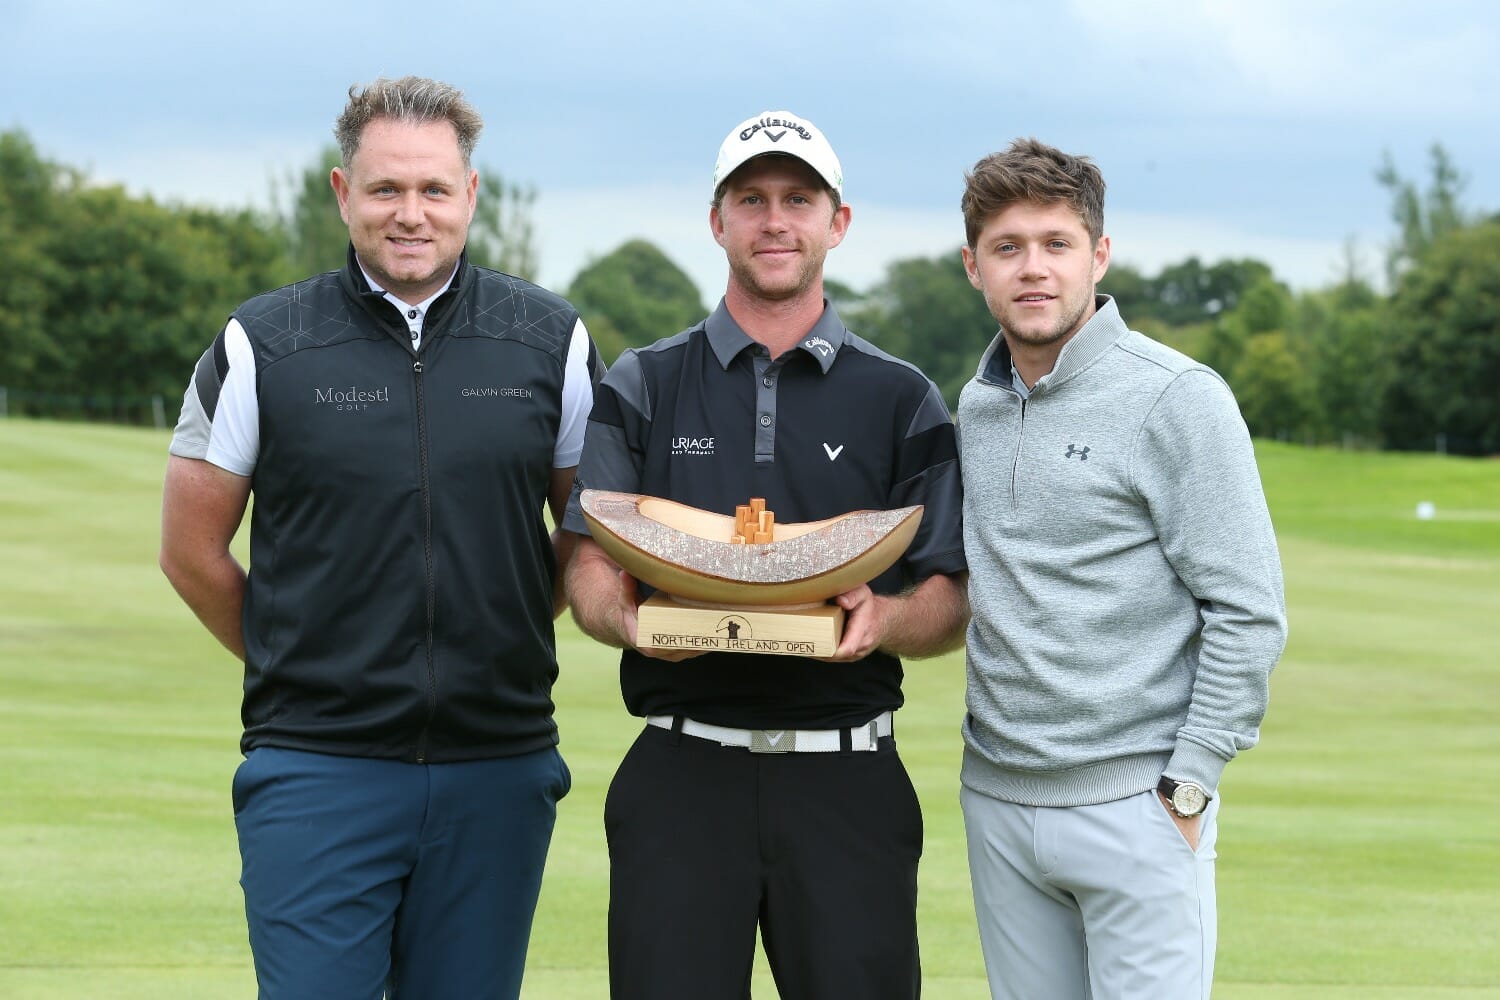 Robin soars to Shootout Sunday win at Galgorm Castle